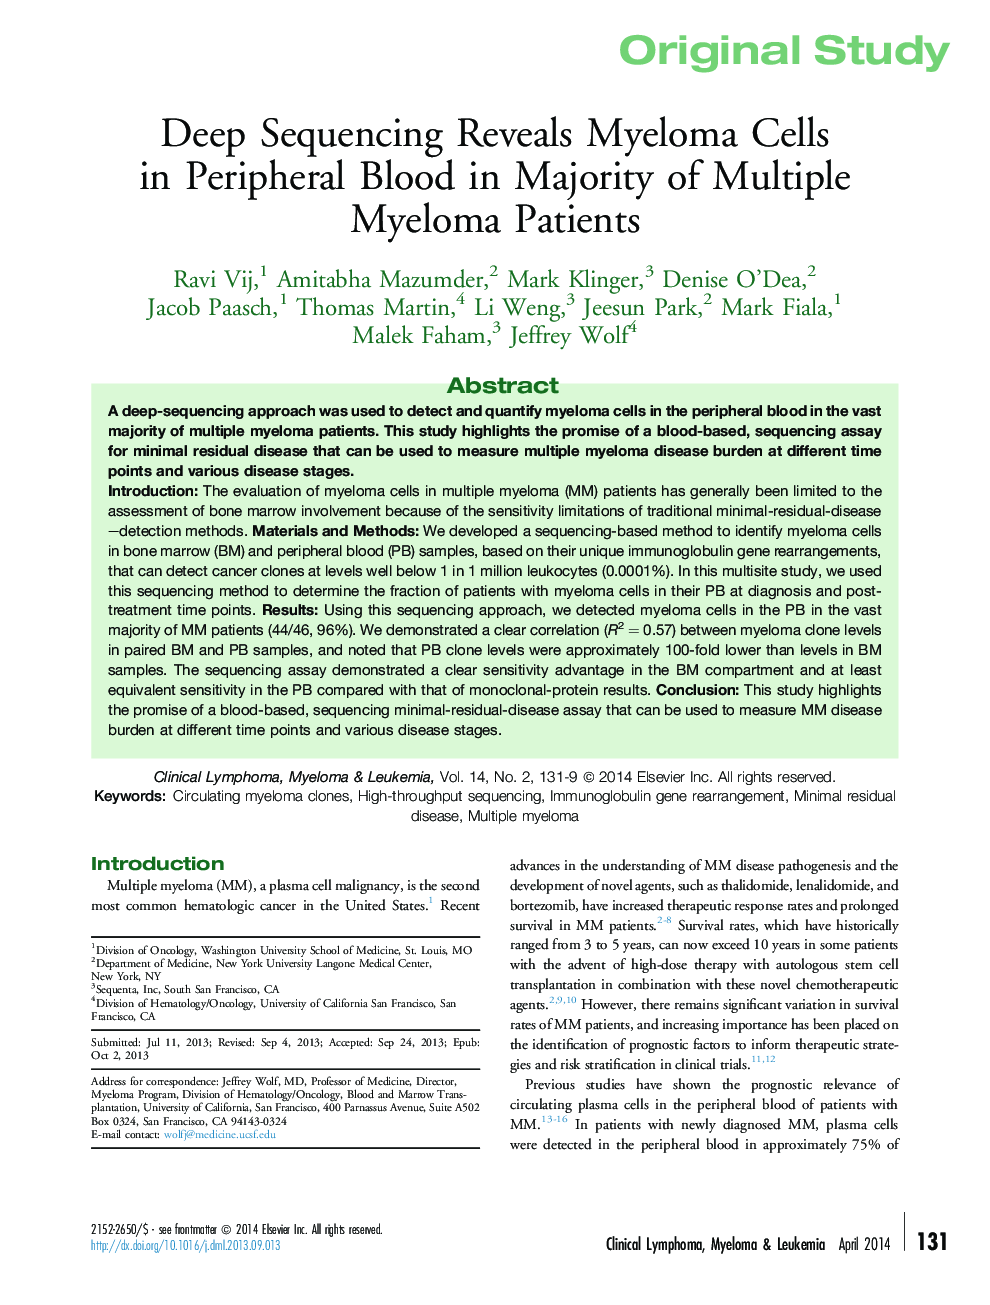 Deep Sequencing Reveals Myeloma Cells in Peripheral Blood in Majority of Multiple Myeloma Patients